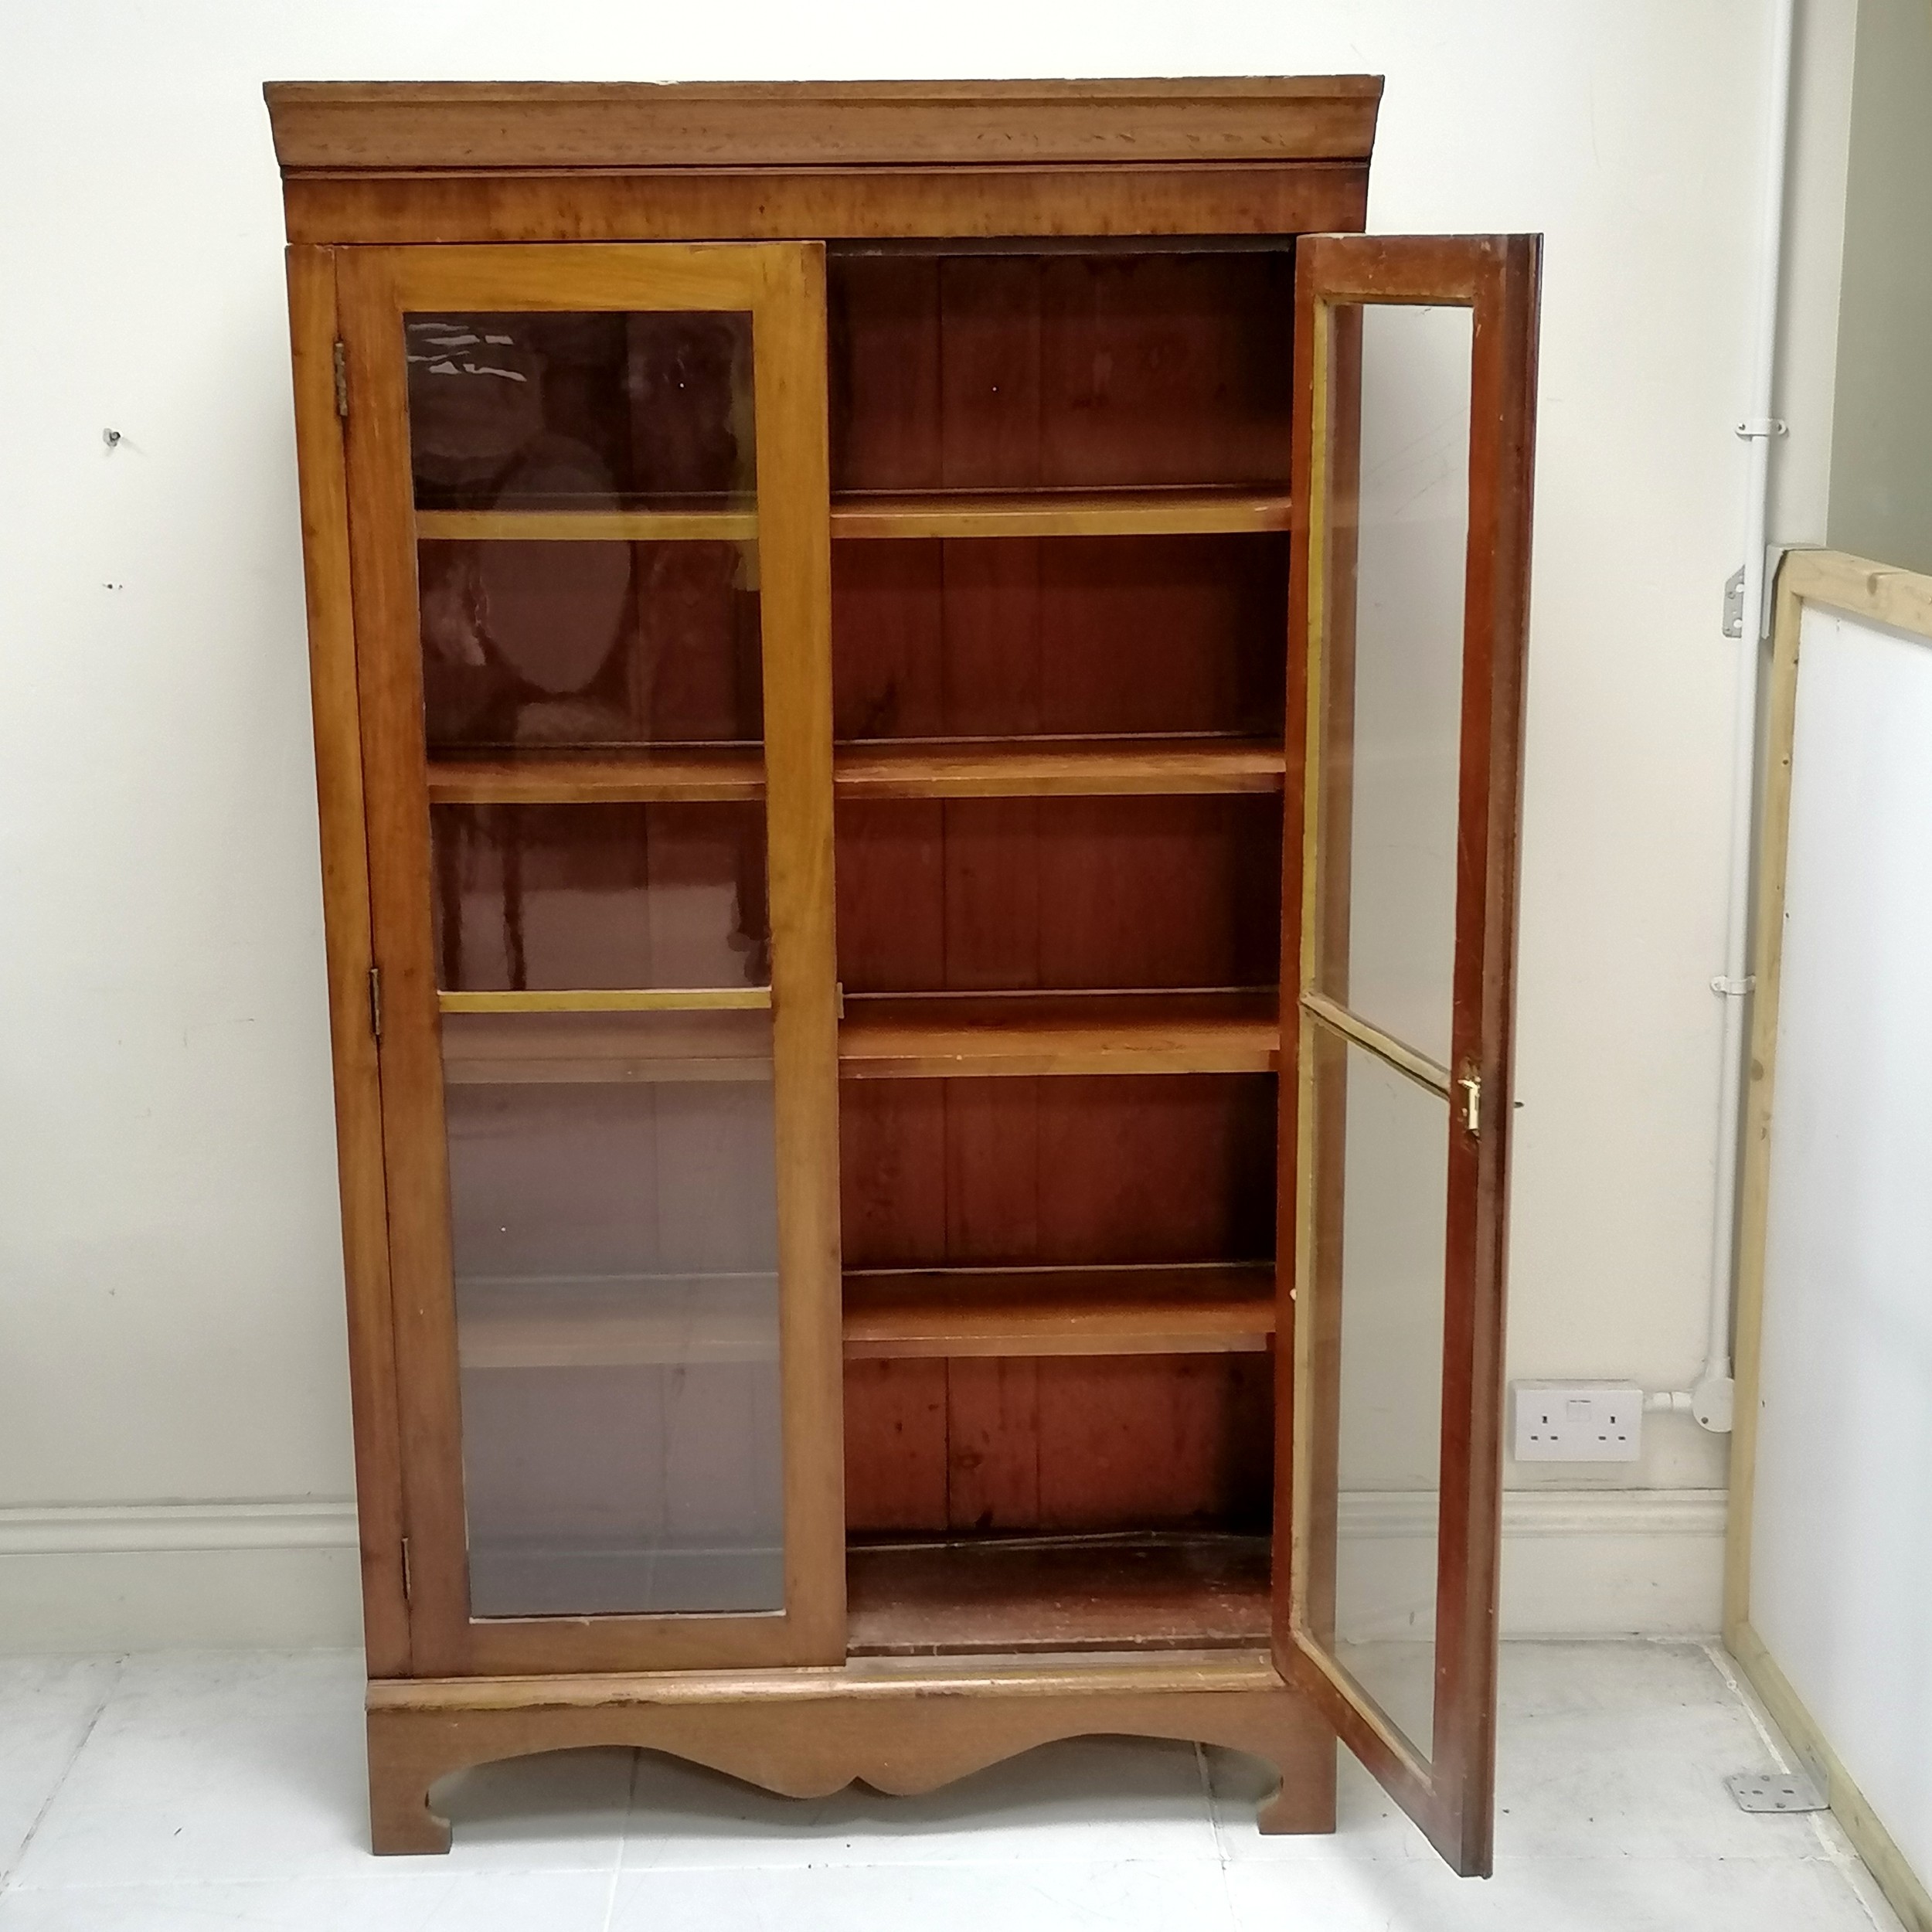 Antique mahogany 2 door glazed 4 shelf bookcase, on bracket feet, in used condition, 100 cm wide x - Image 3 of 5